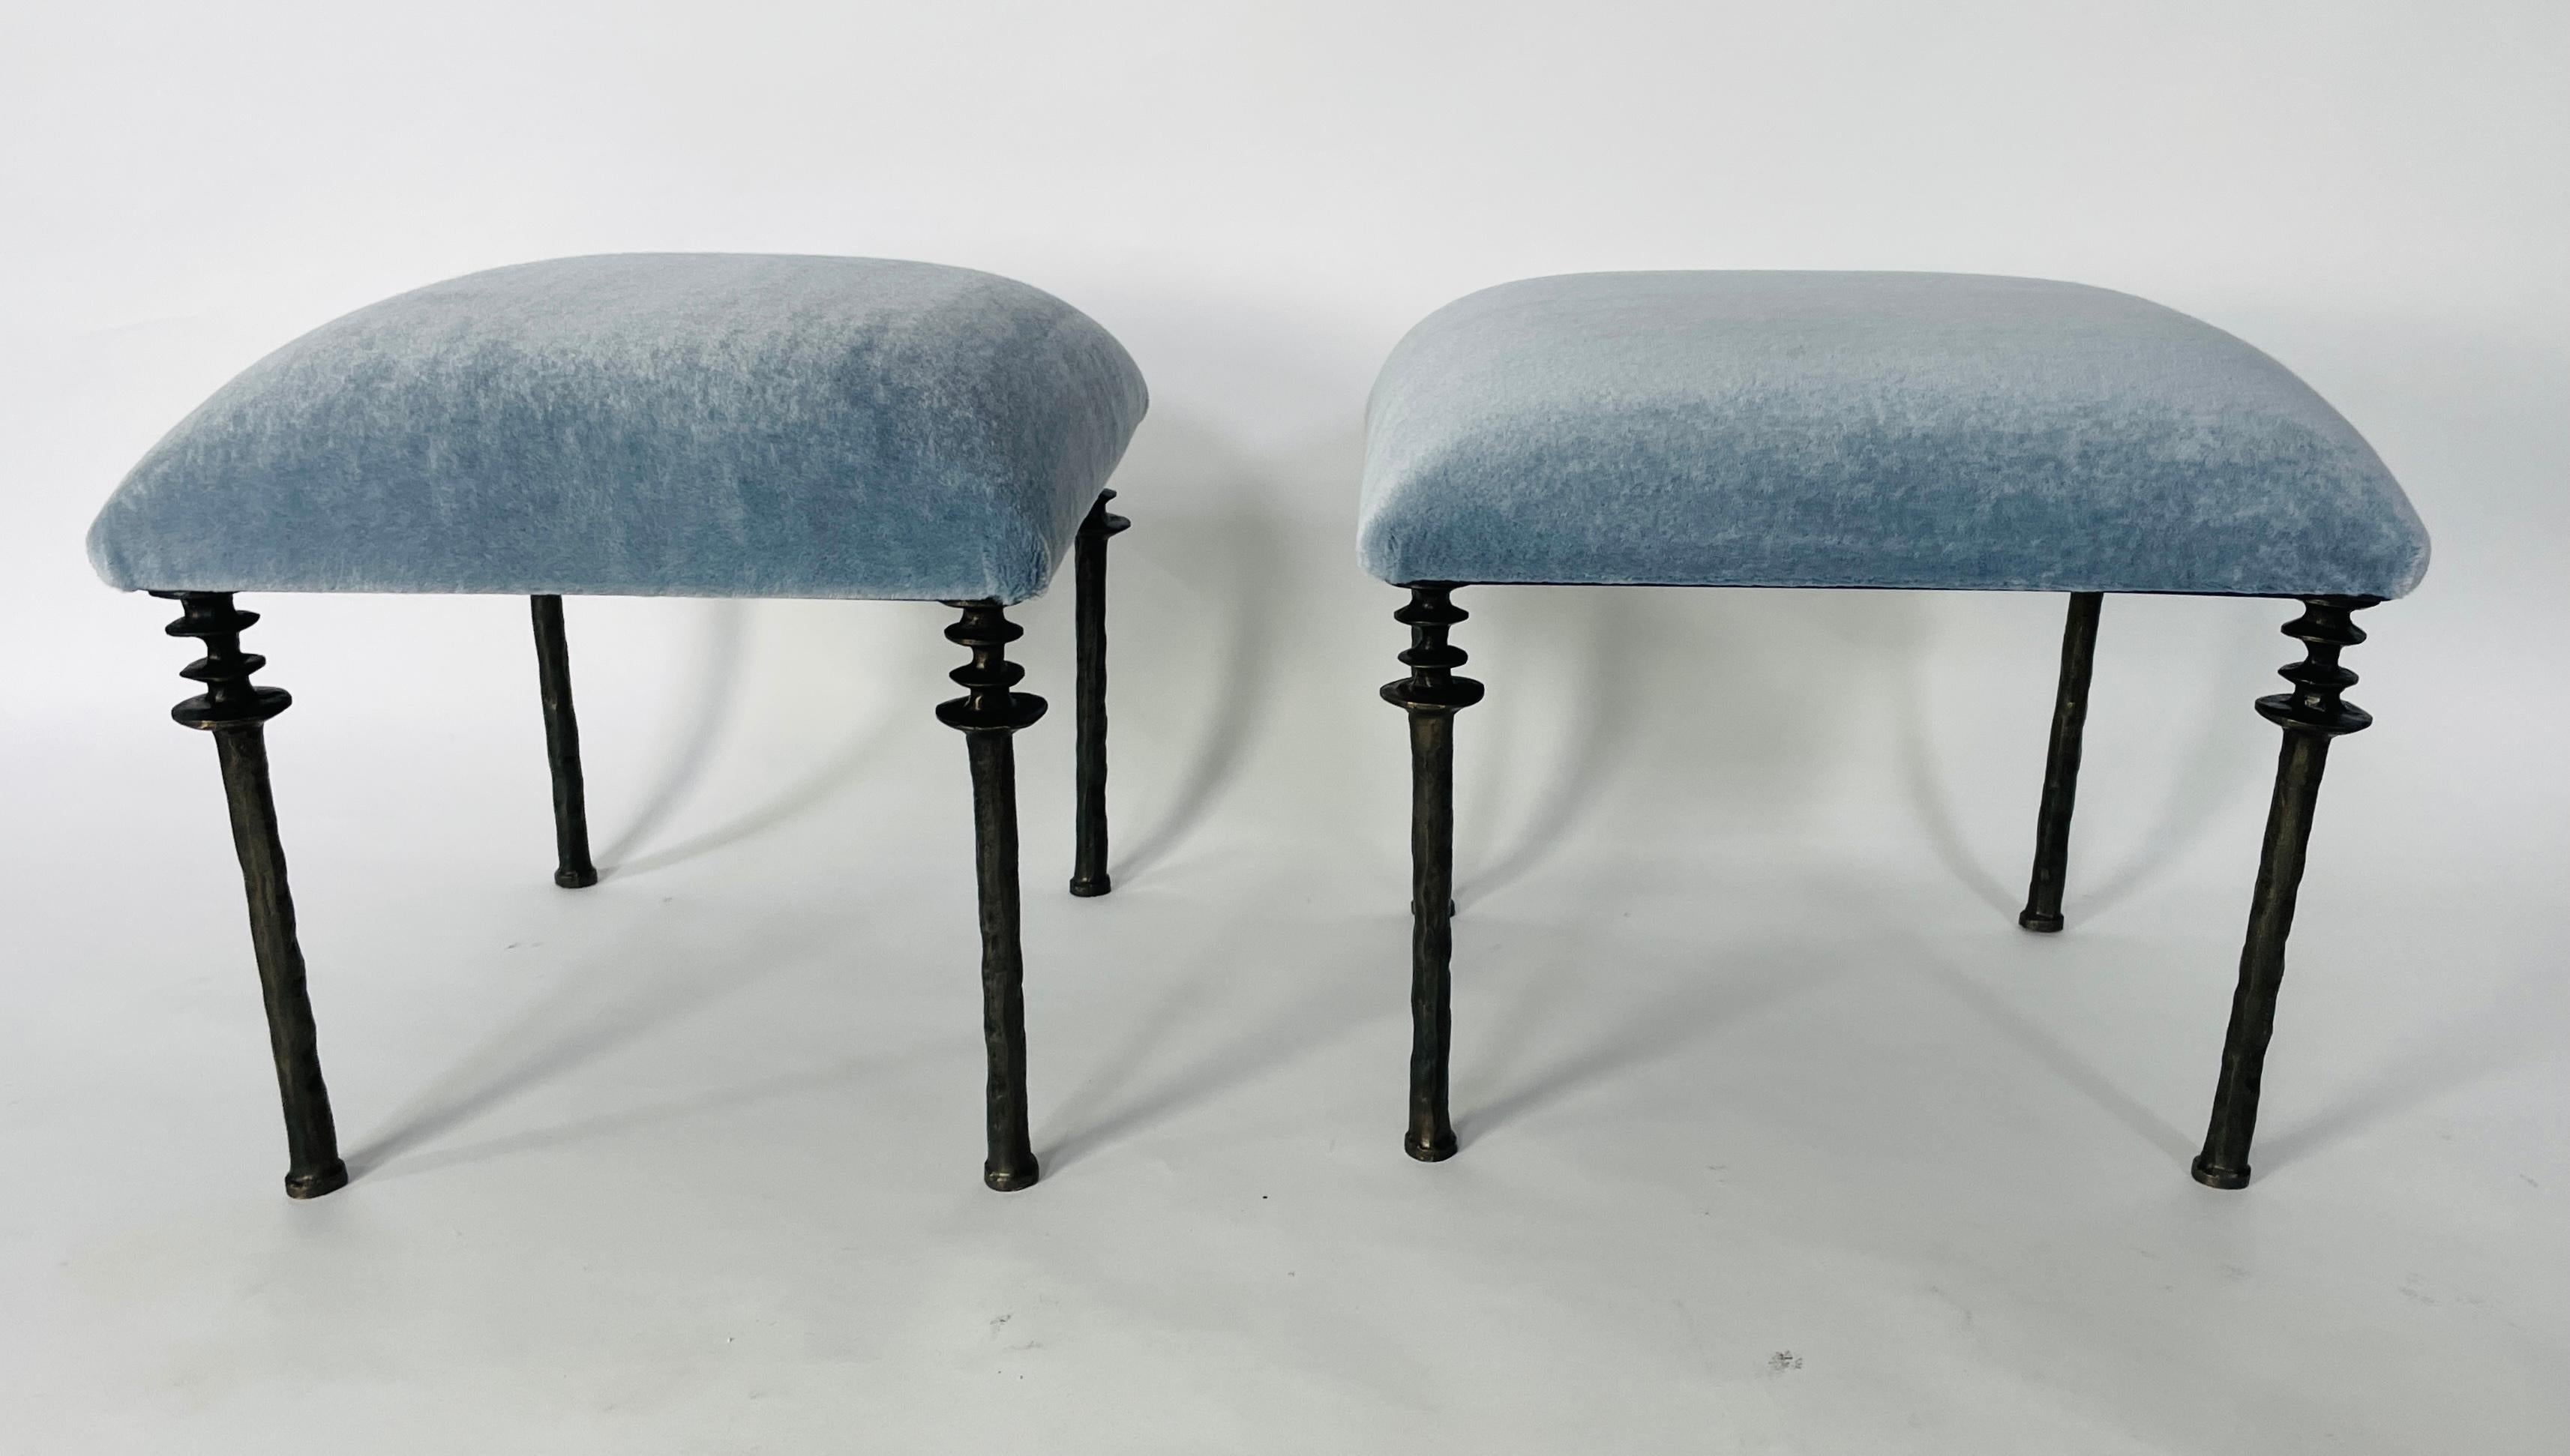 Organic Modern Pair of Sorgue Stools, by Bourgeois Boheme Atelier, Blue Mohair Upholstery